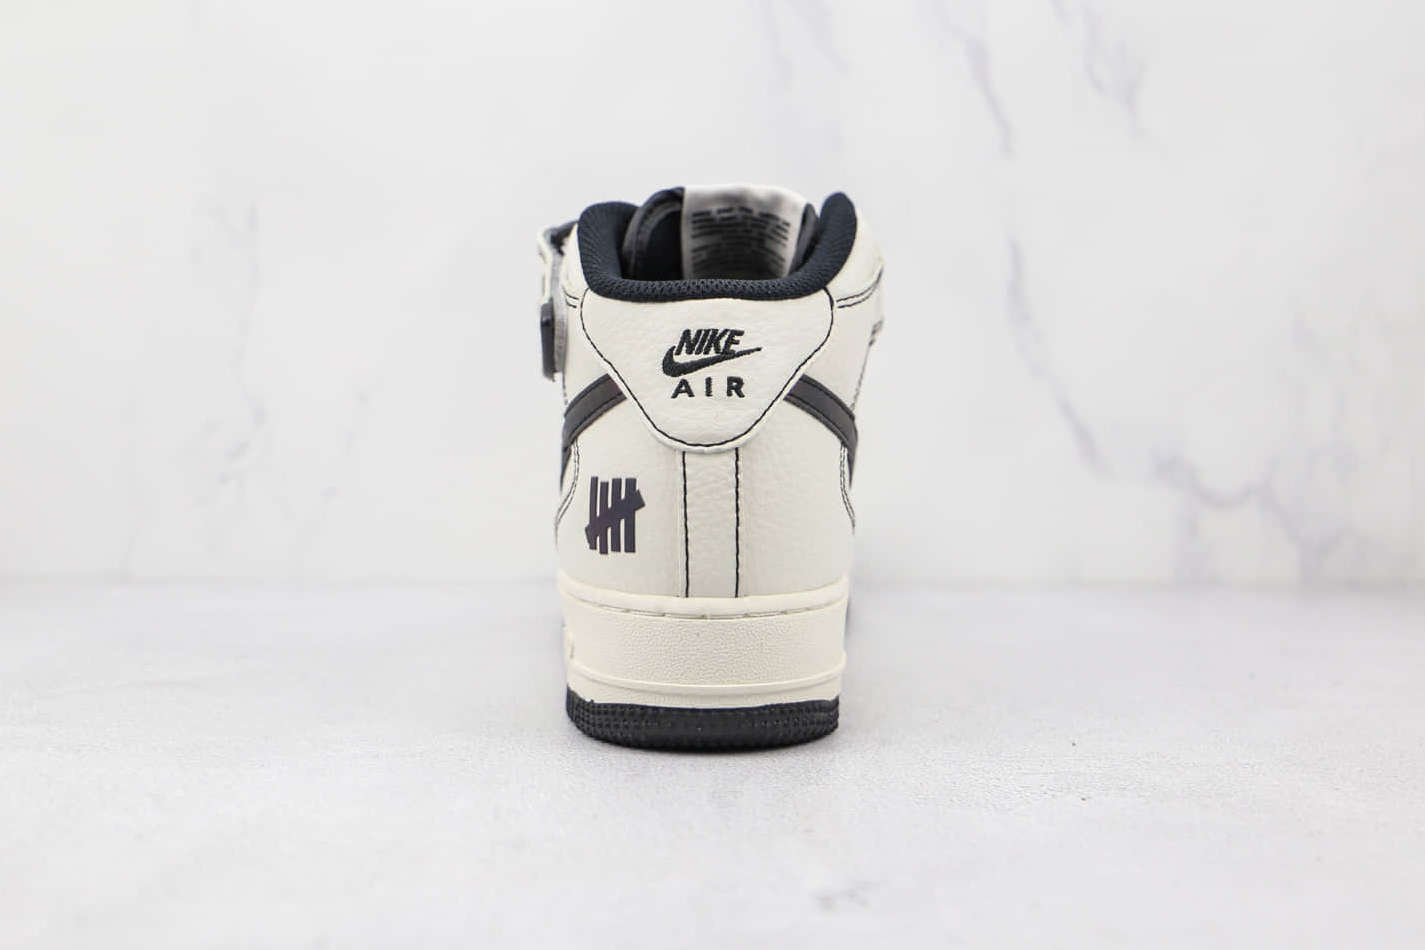 Nike Air Force 1 07 Mid Su19 White Black Shoes CJ6690-100 - Stylish and Classic Design for Men - Order Now!